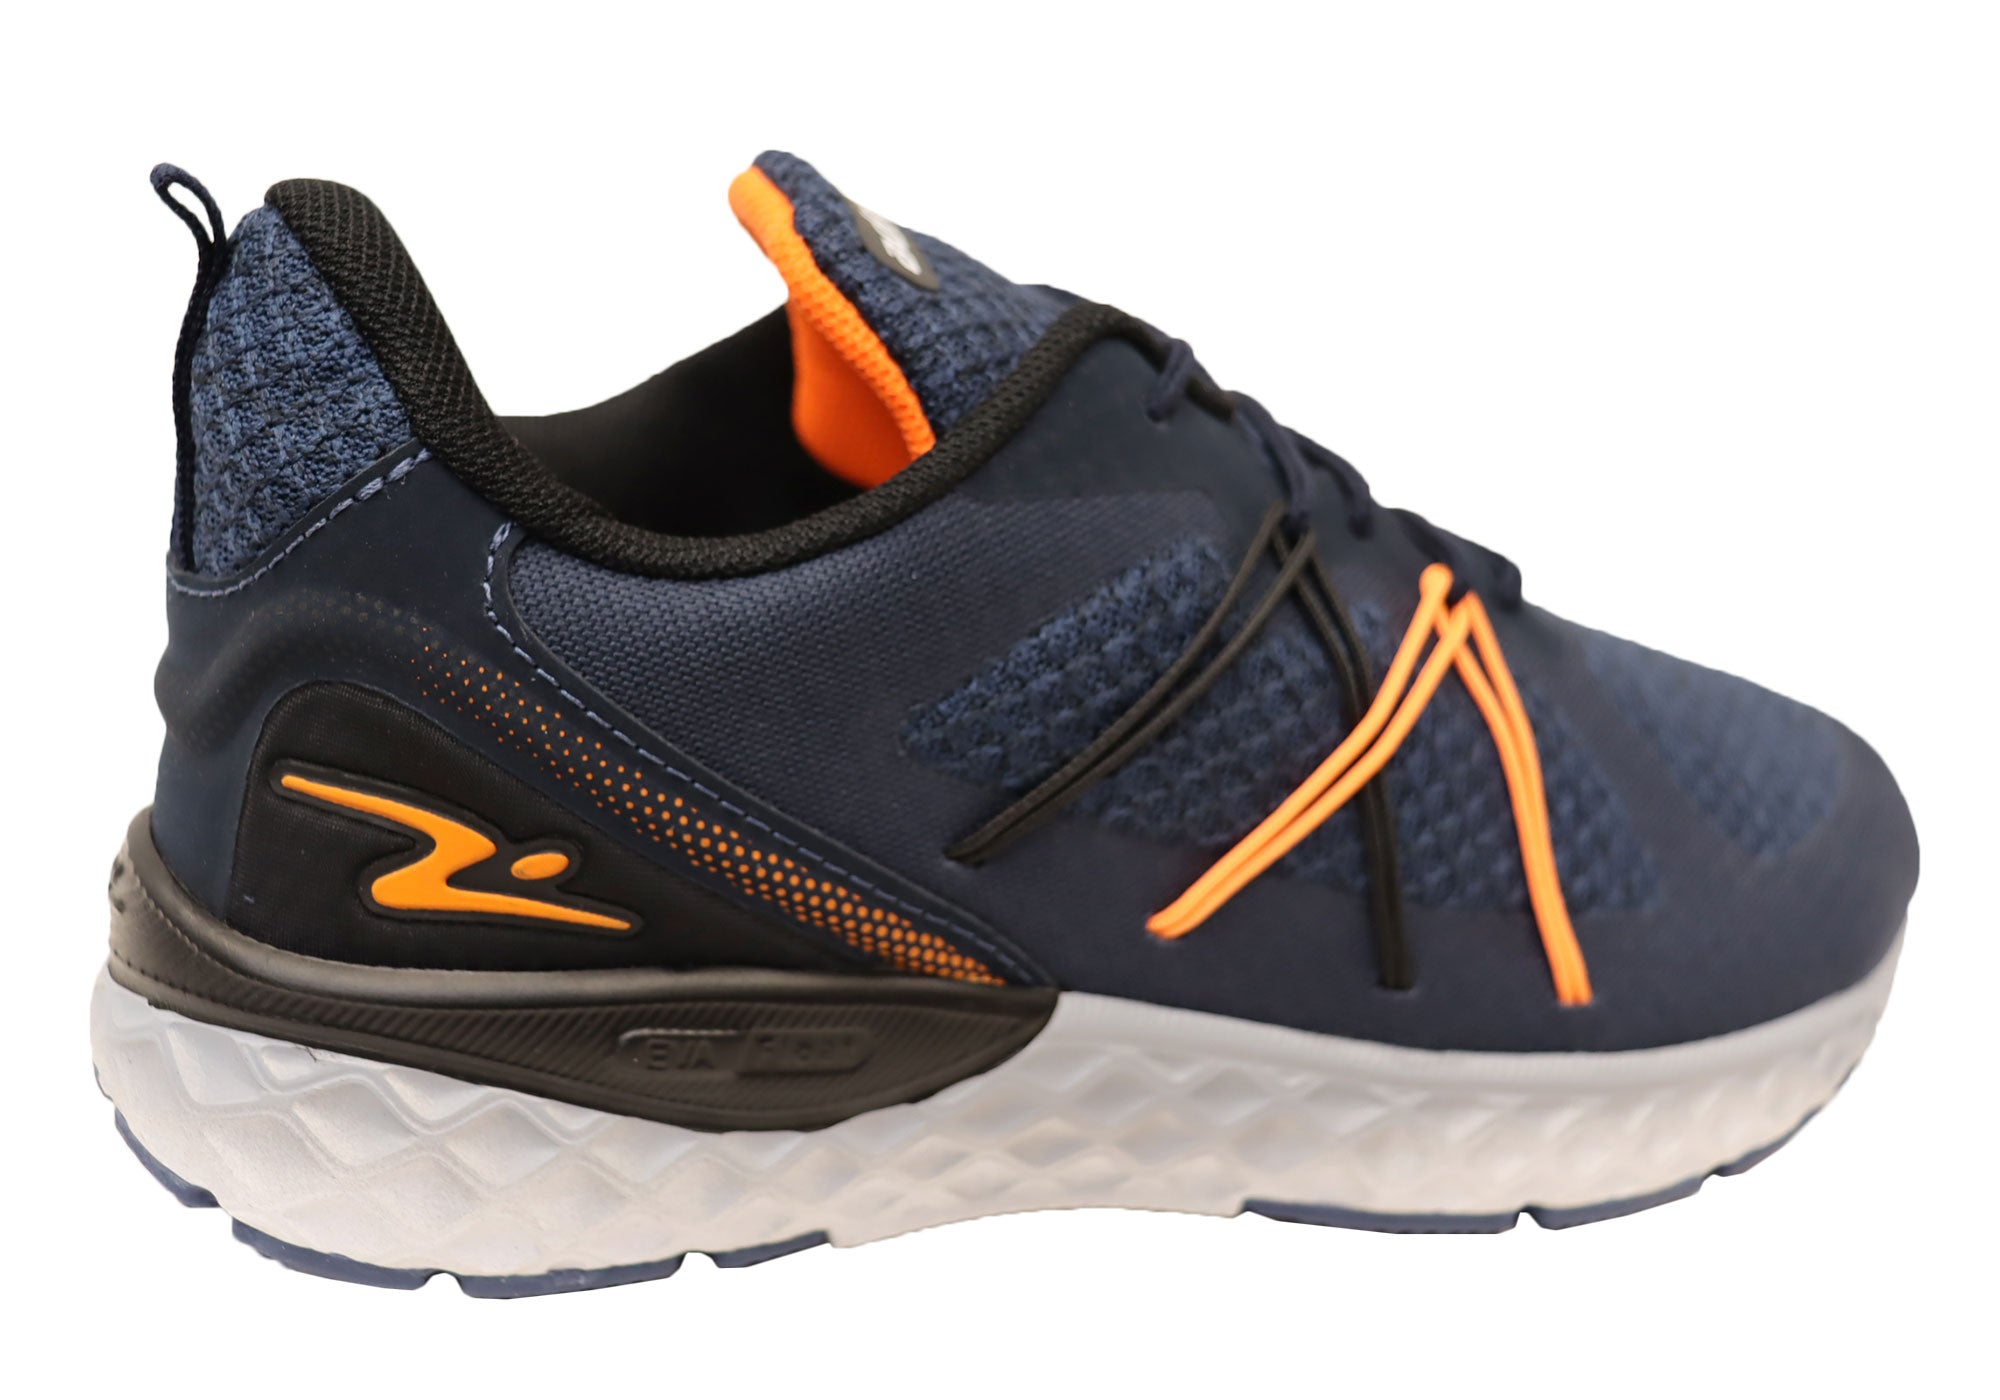 Adrun Magnum Mens Comfortable Athletic Shoes Made In Brazil